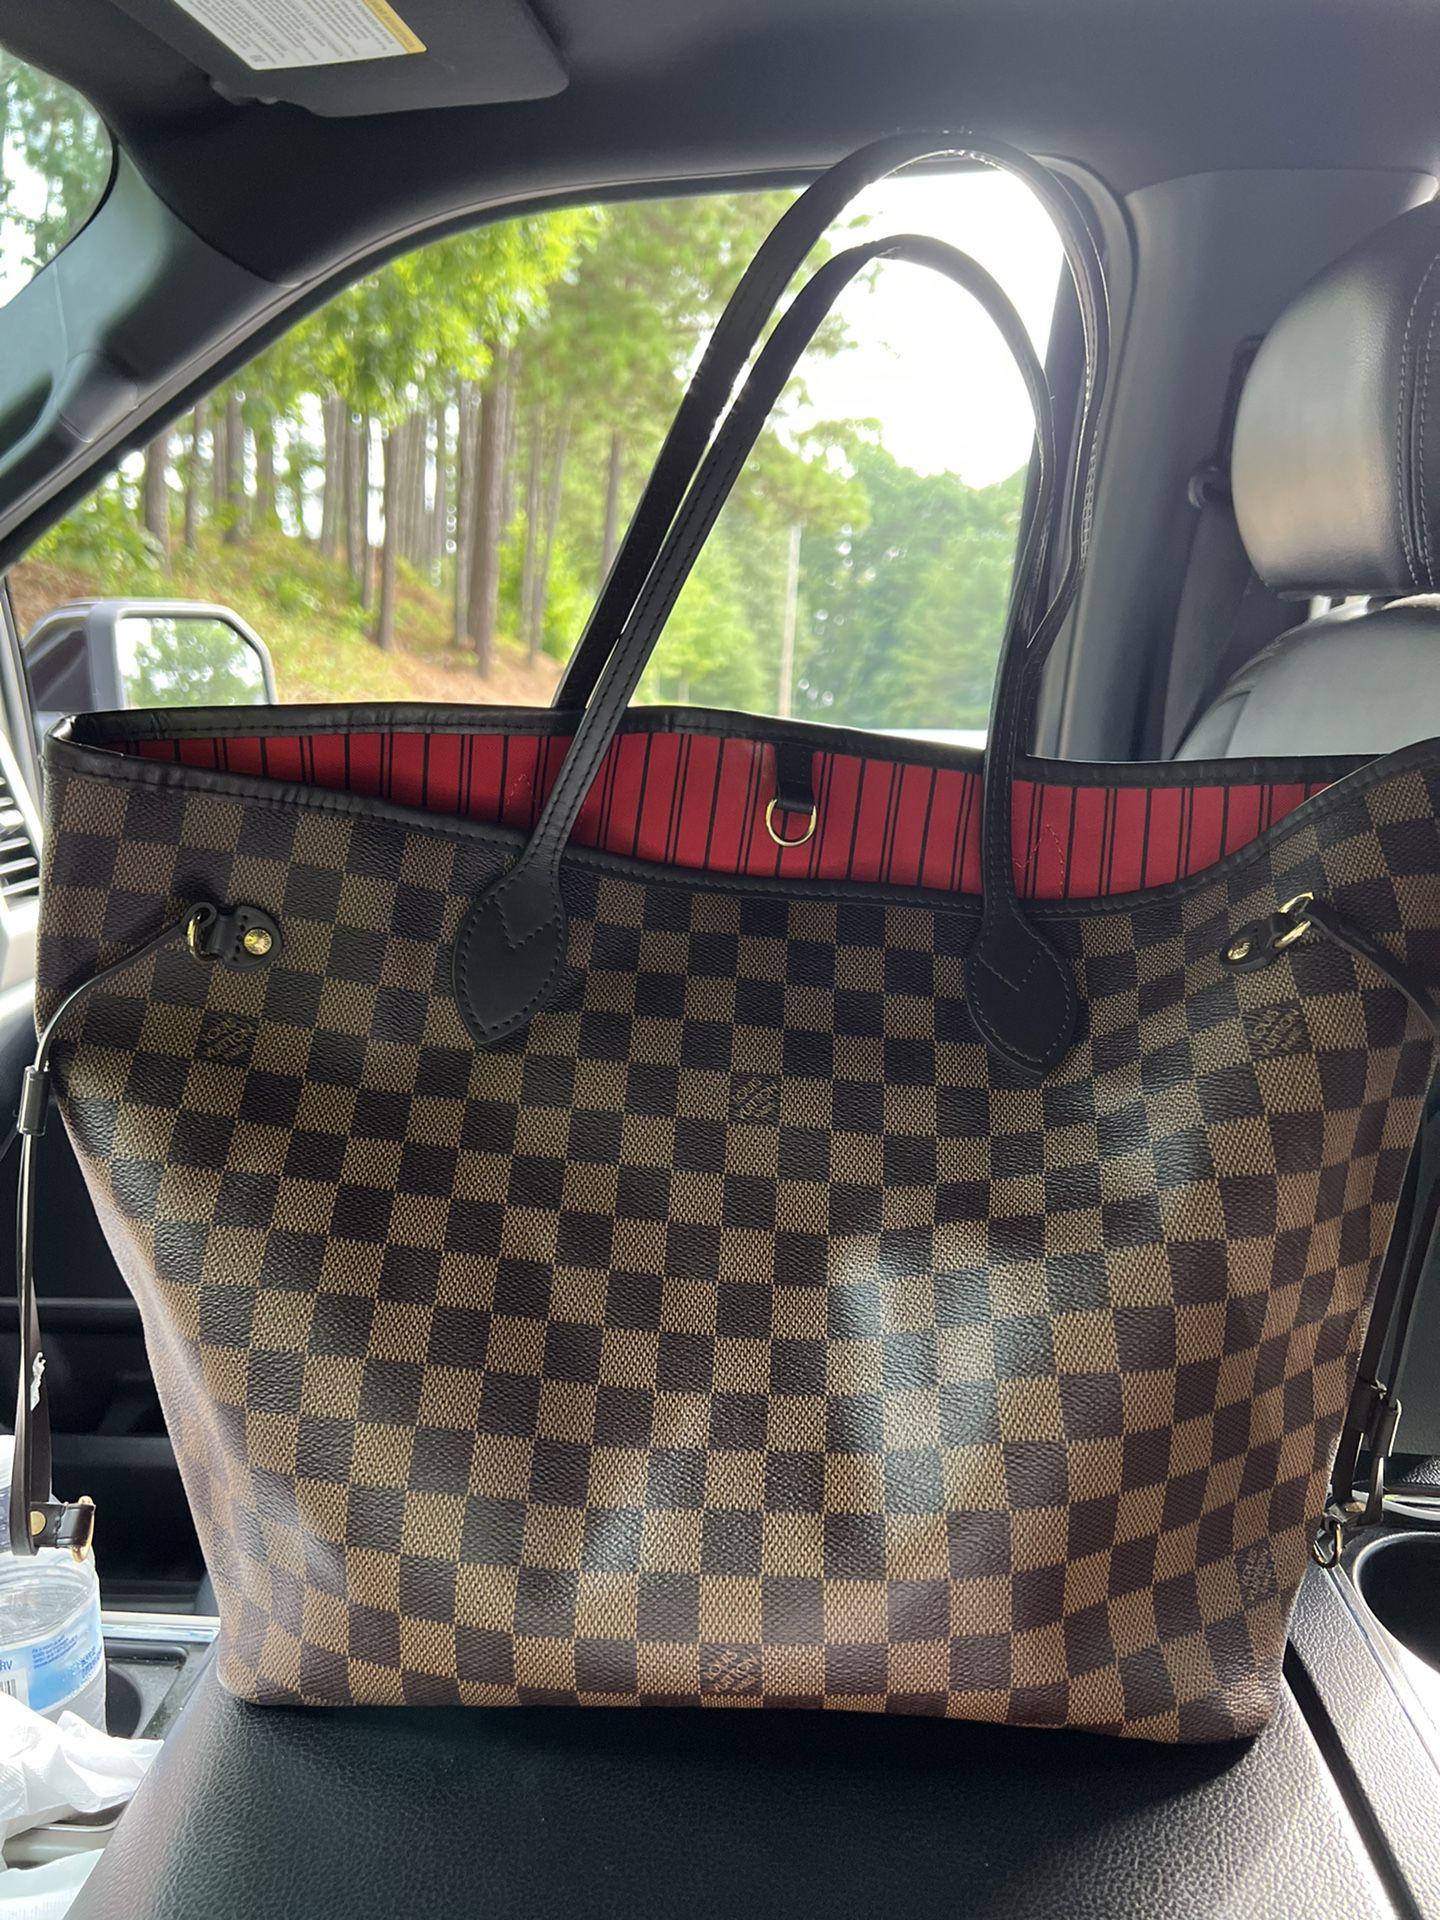 used louis vuitton bags for sale near me